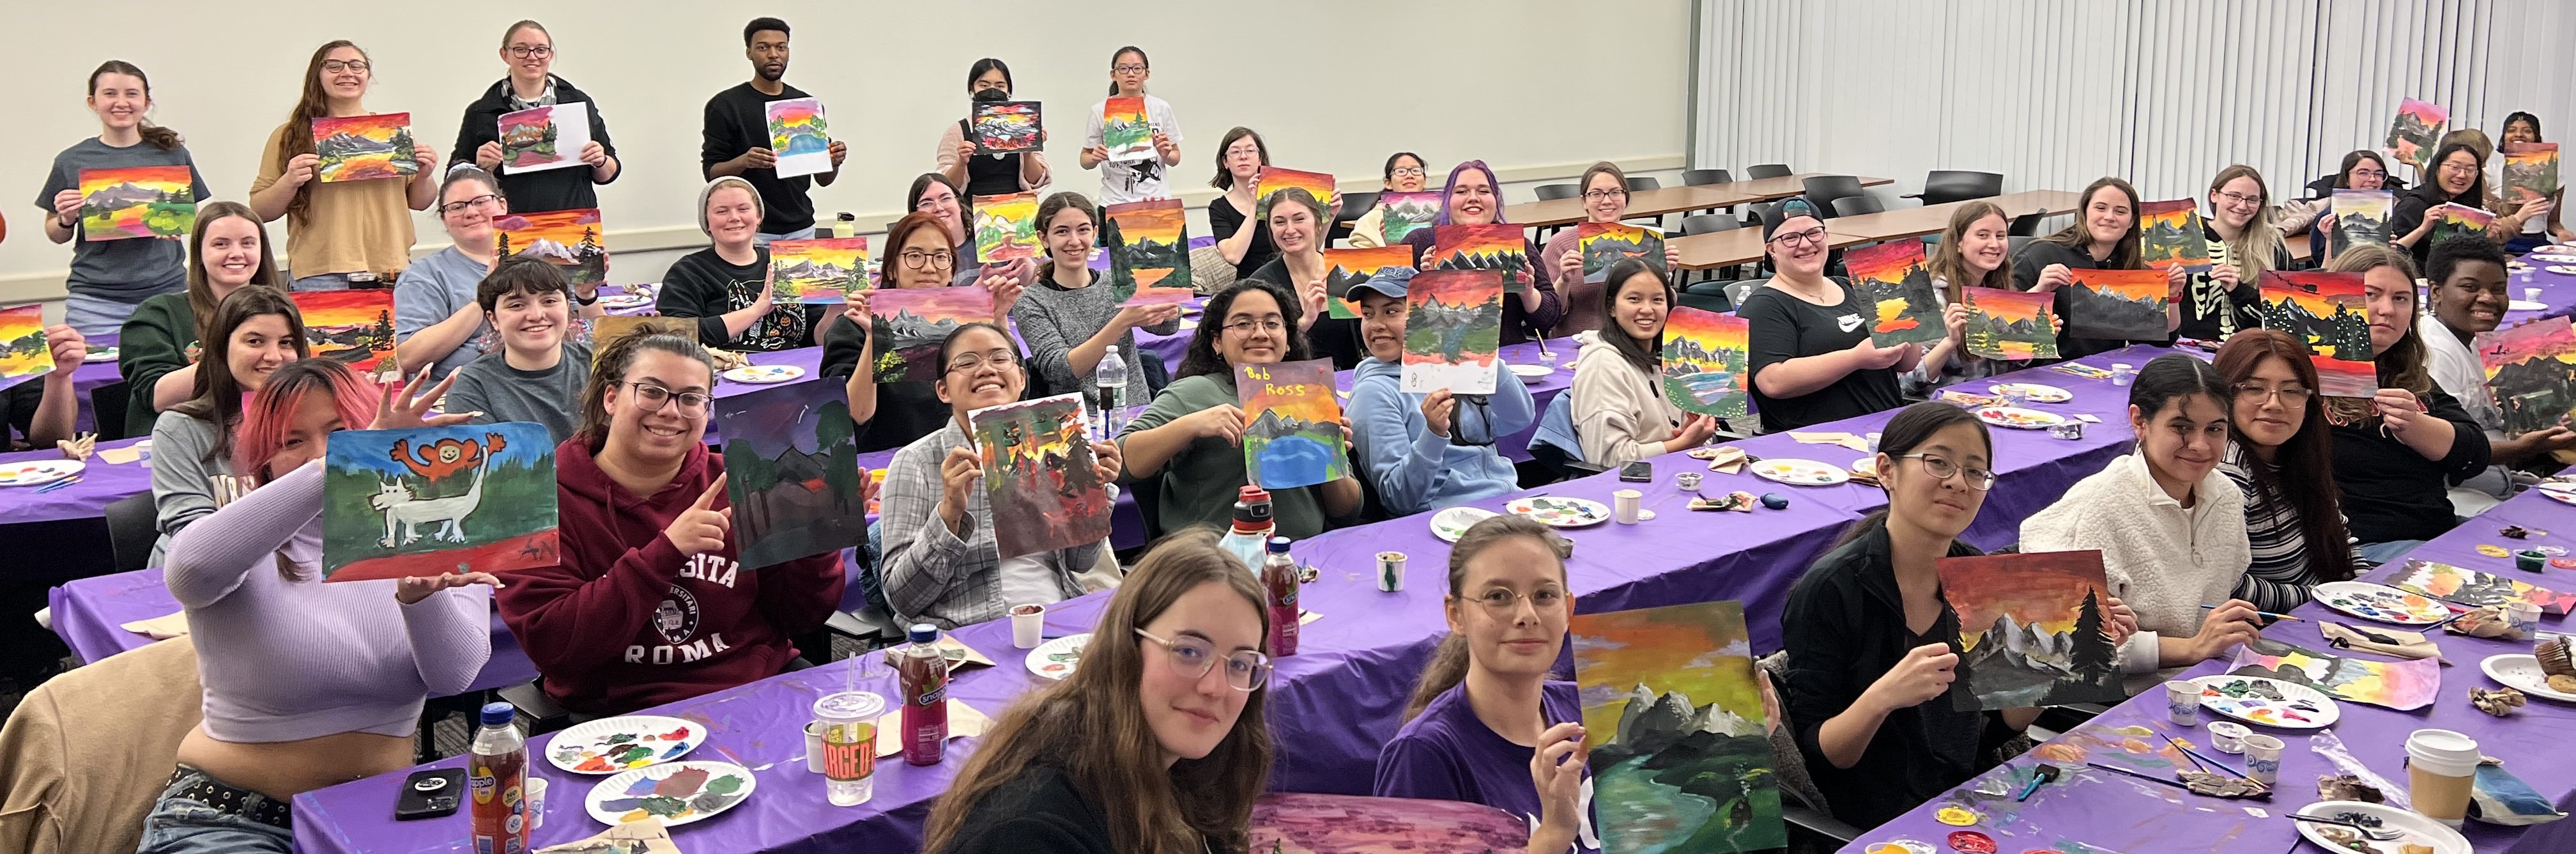 WiC Members holding up paintings at purple covered tables.